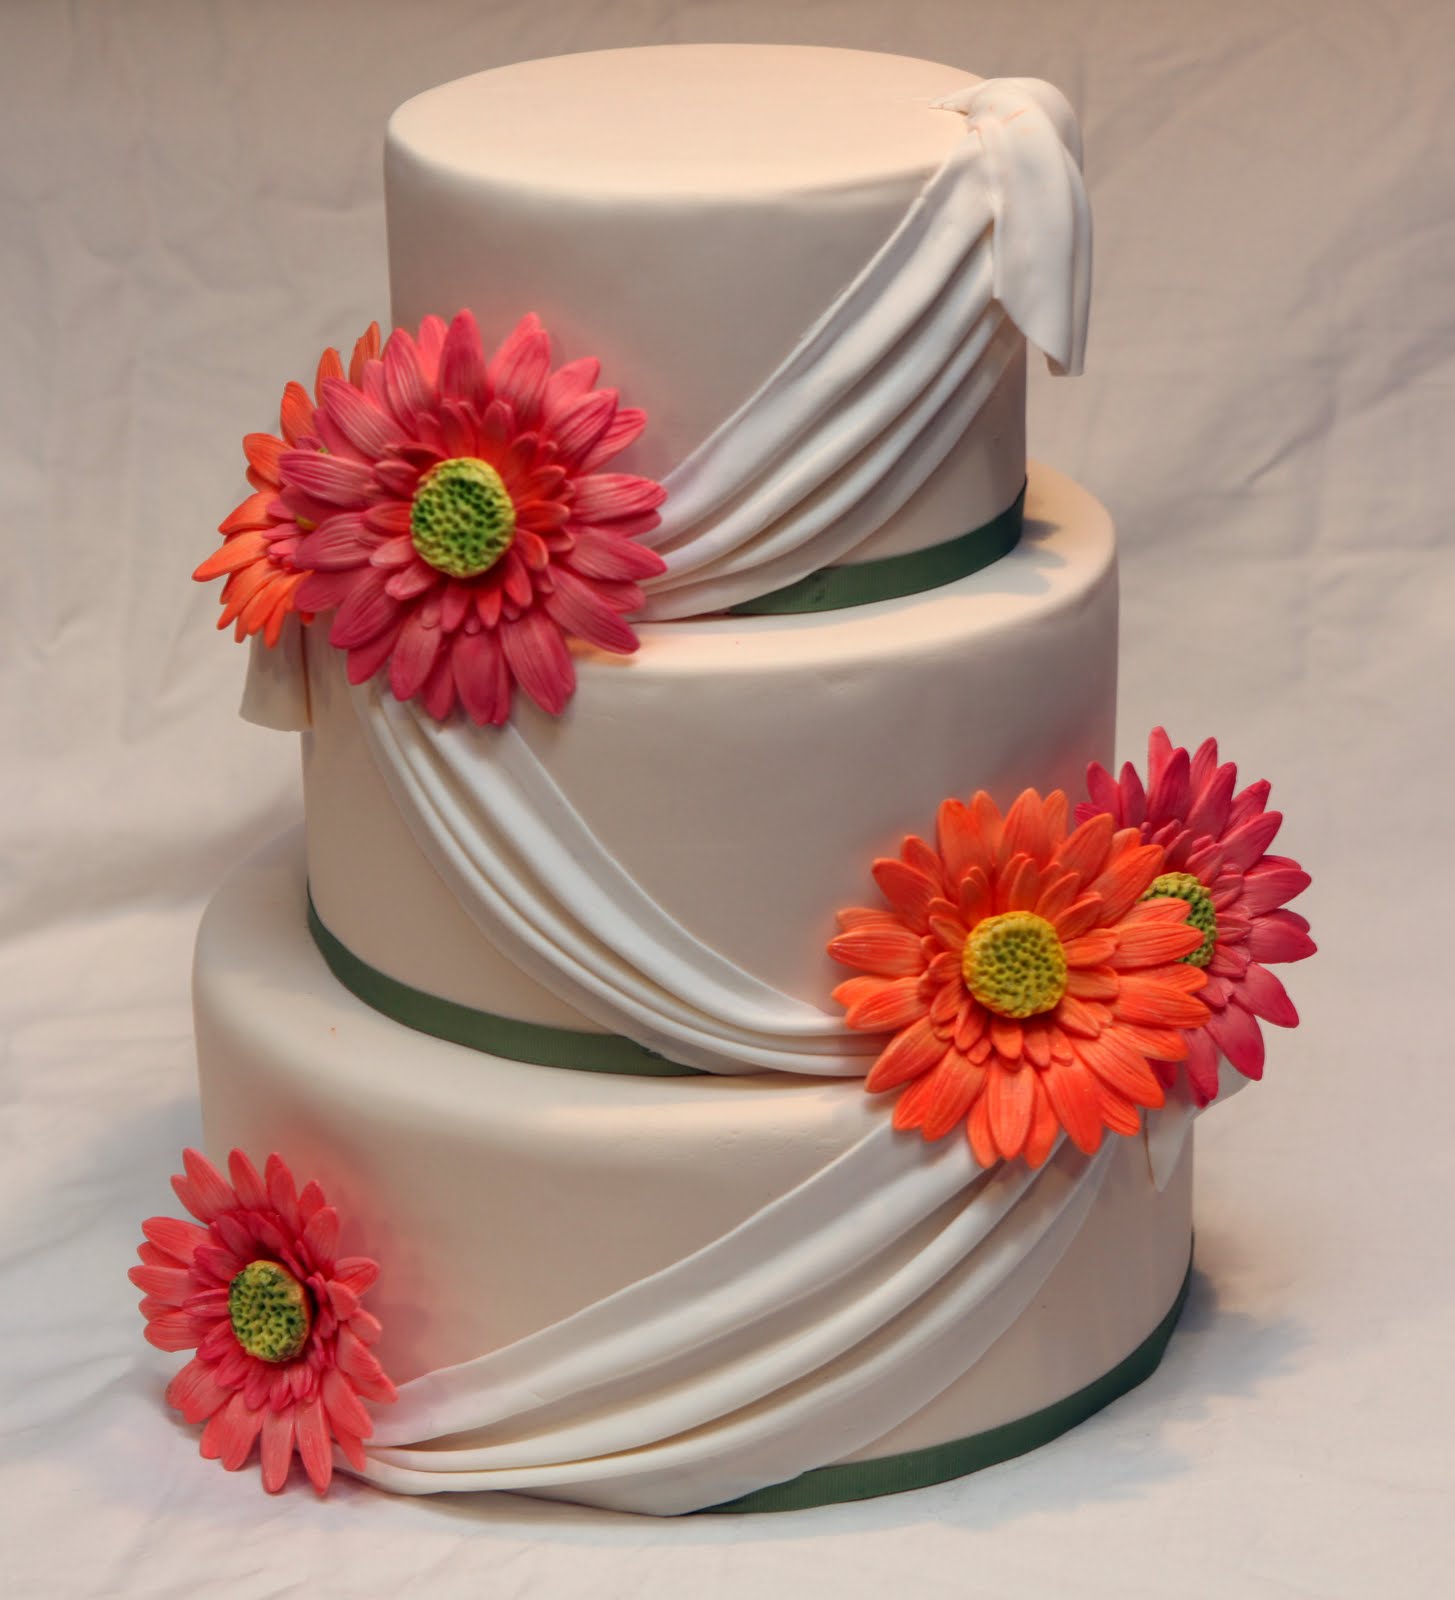 floral wedding cake images Classic 3-tier wedding cake.